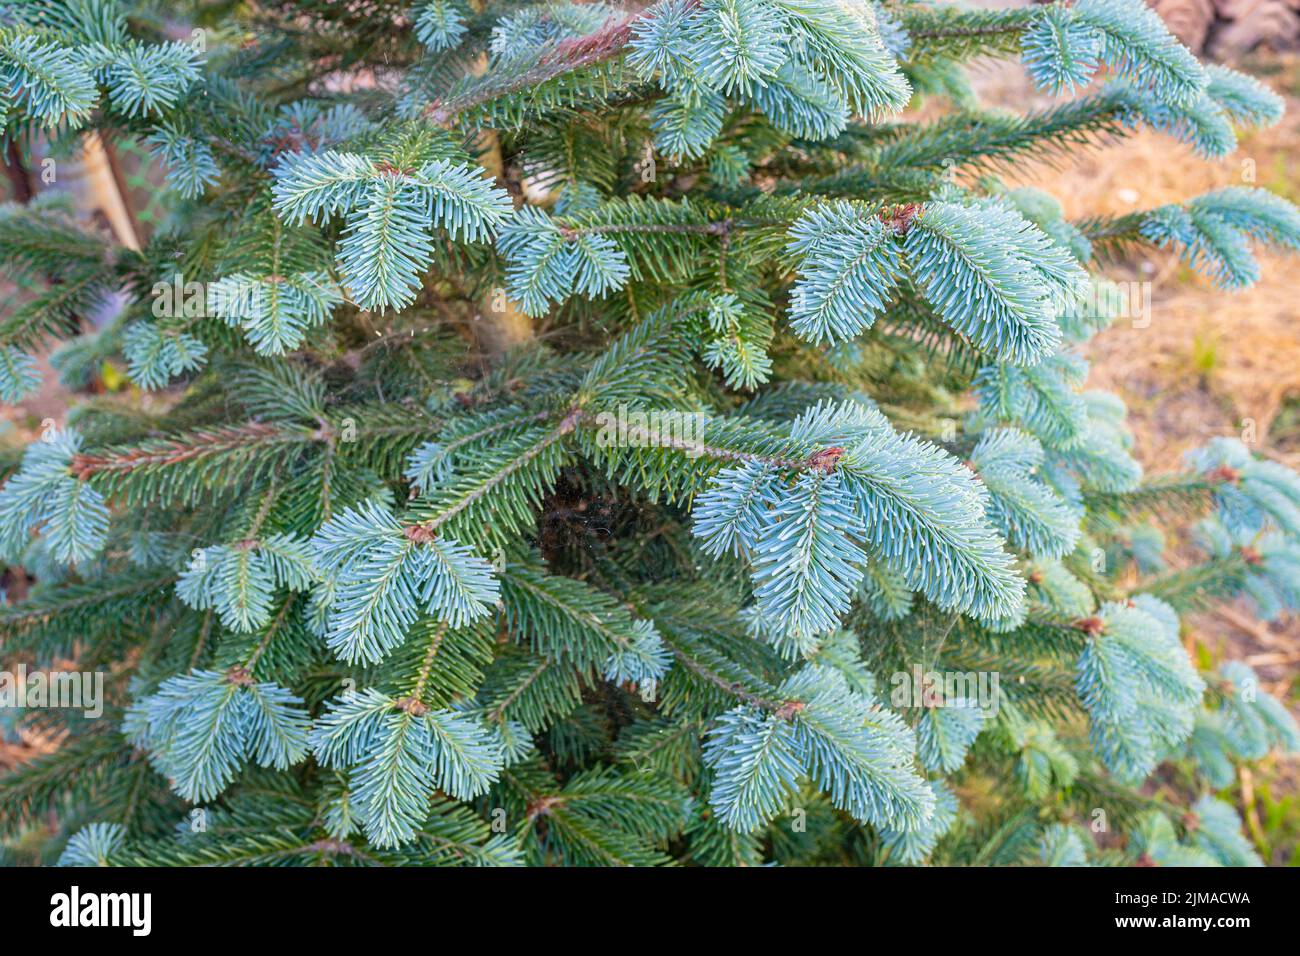 Detailed image of young twigs of corkbark fir (Abies lasiocarpa arizonica) with fresh soft blue-green needles in a garden Stock Photo